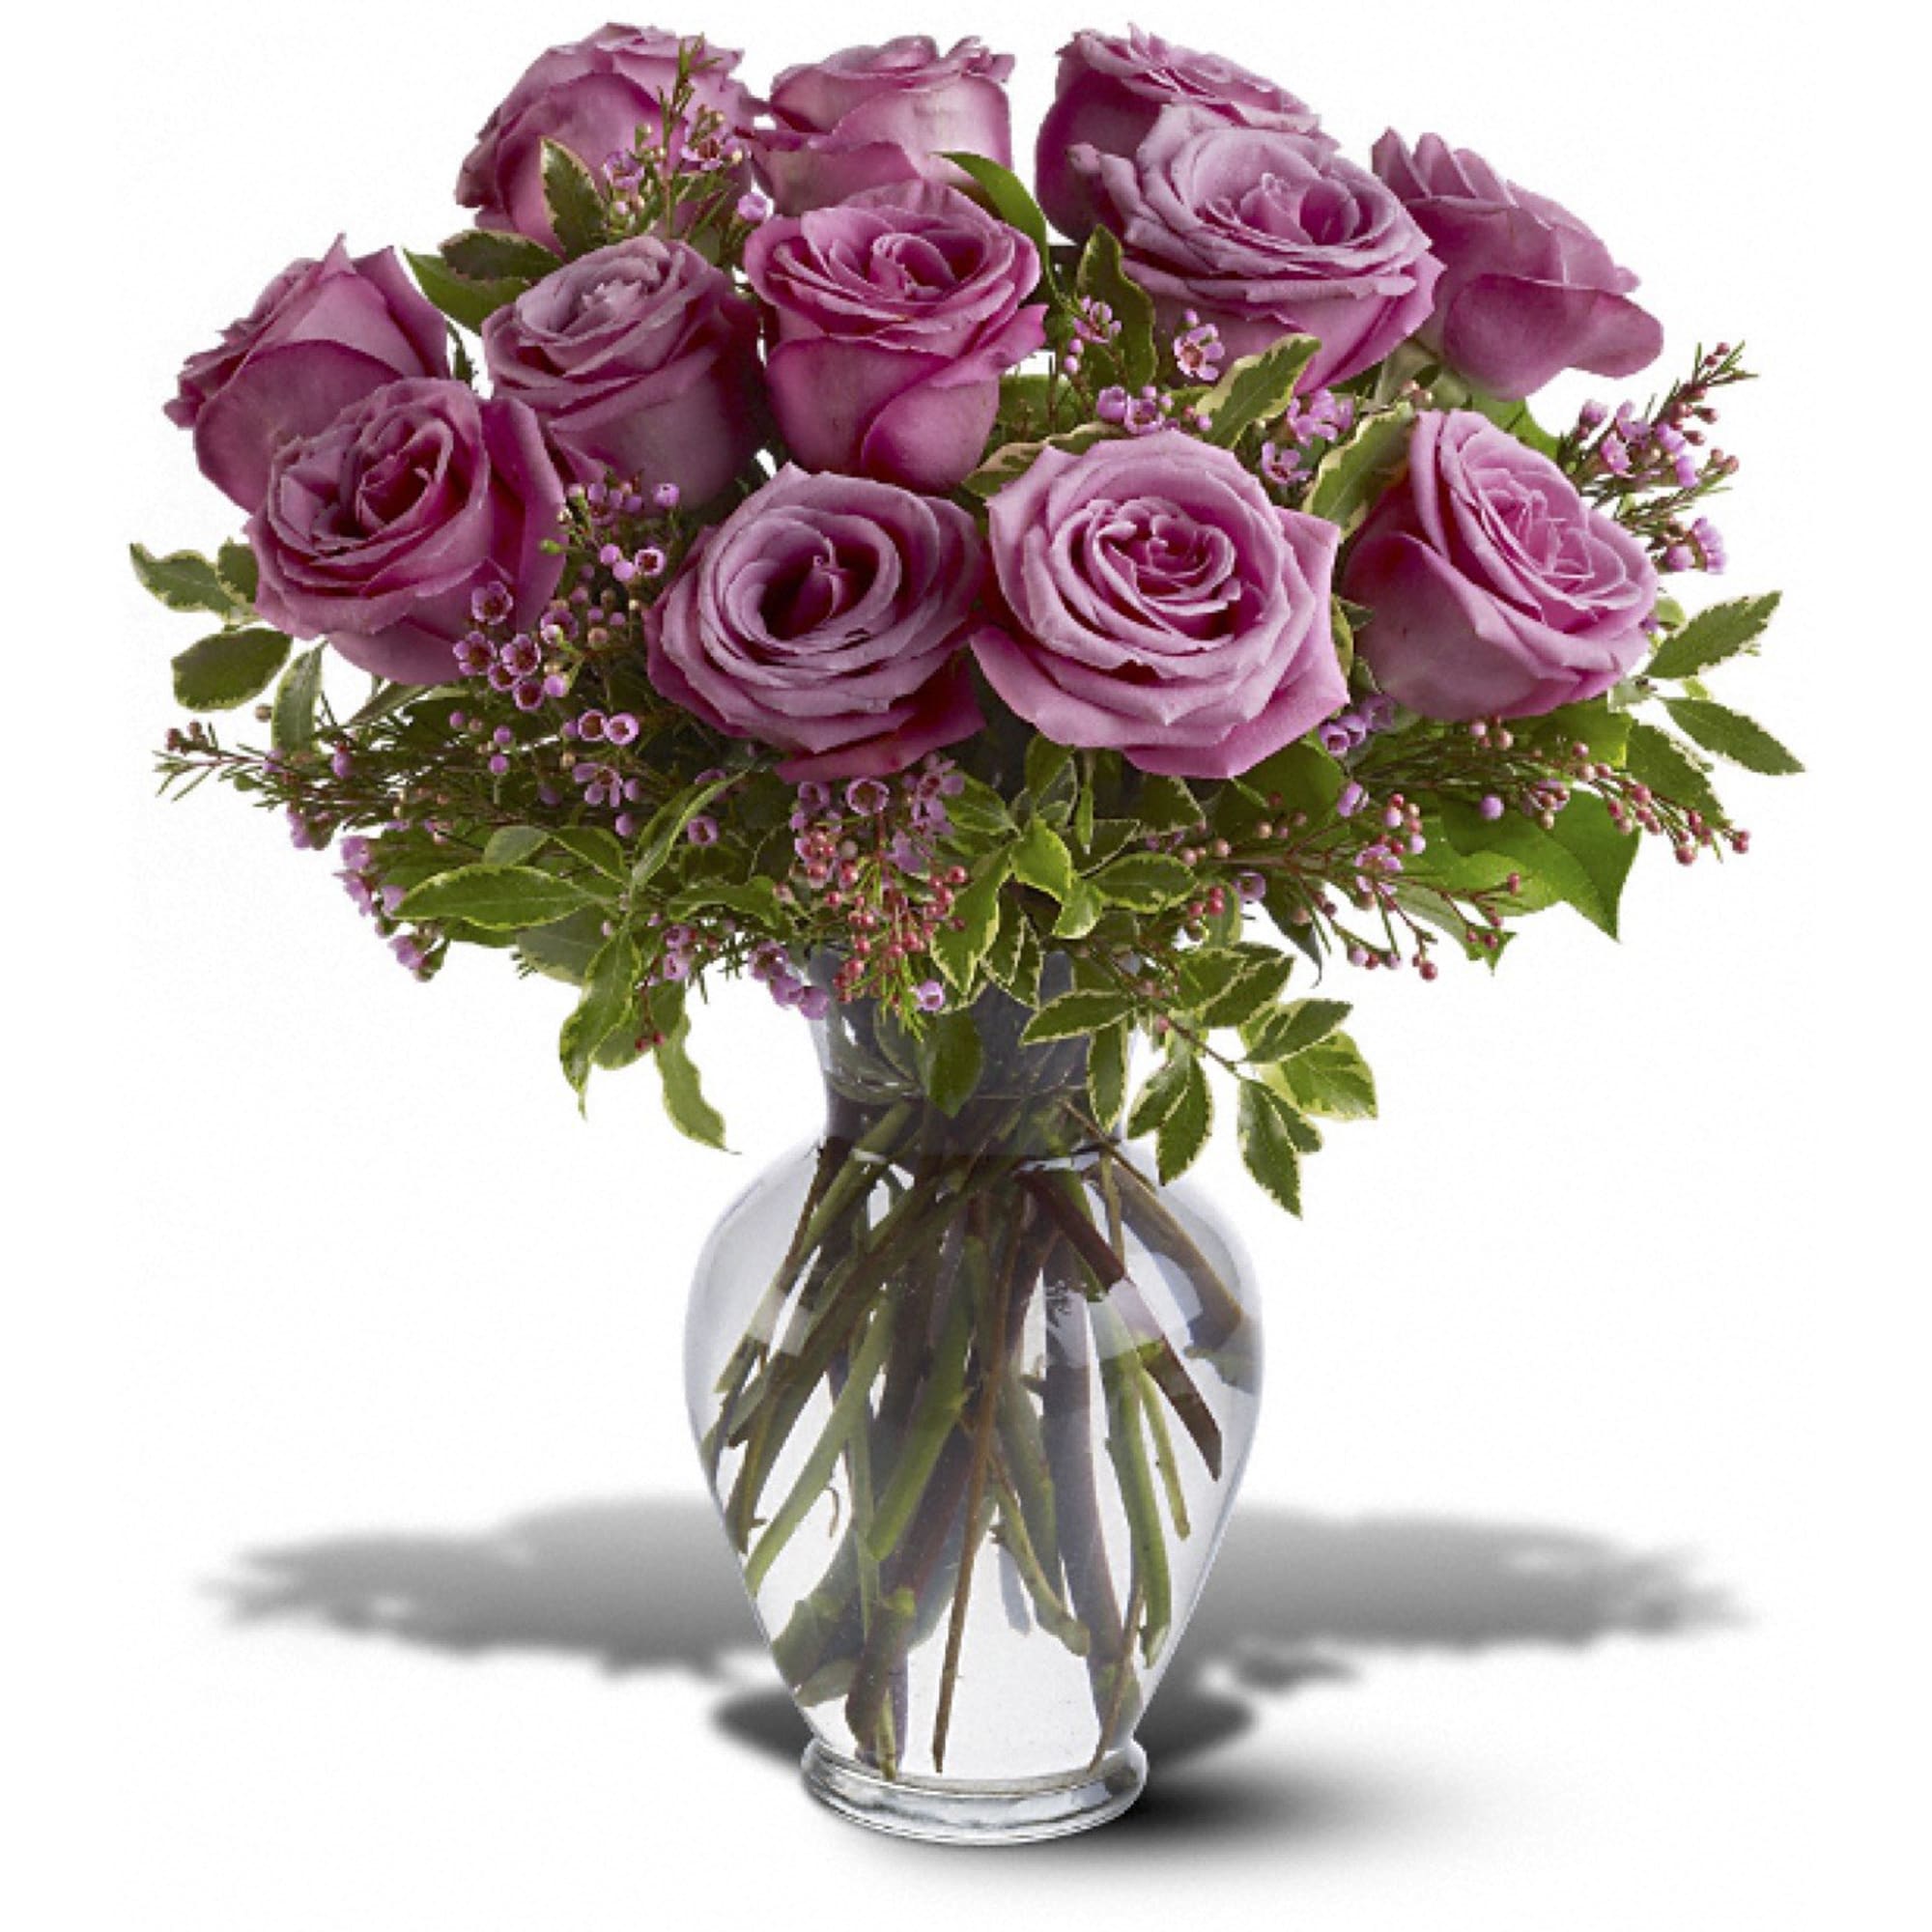 A Dozen Lavender Roses - 12 lavender roses, with variegated pittosporum and salal, arrive in a classic glass urn vase. Approximately 14&quot; W x 16&quot; H